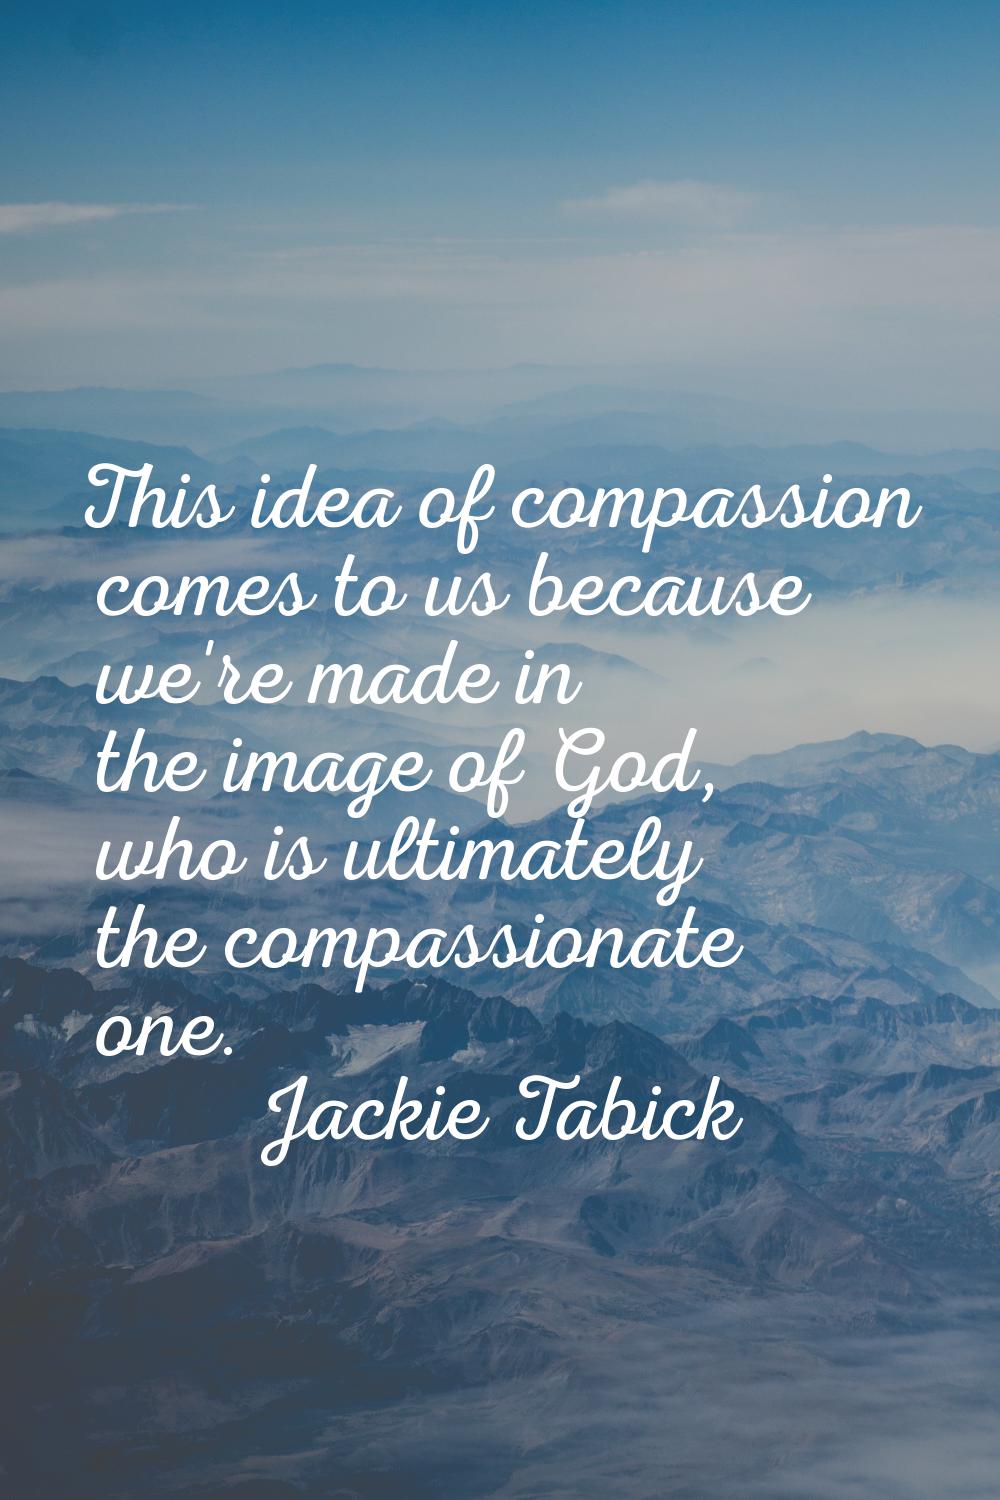 This idea of compassion comes to us because we're made in the image of God, who is ultimately the c